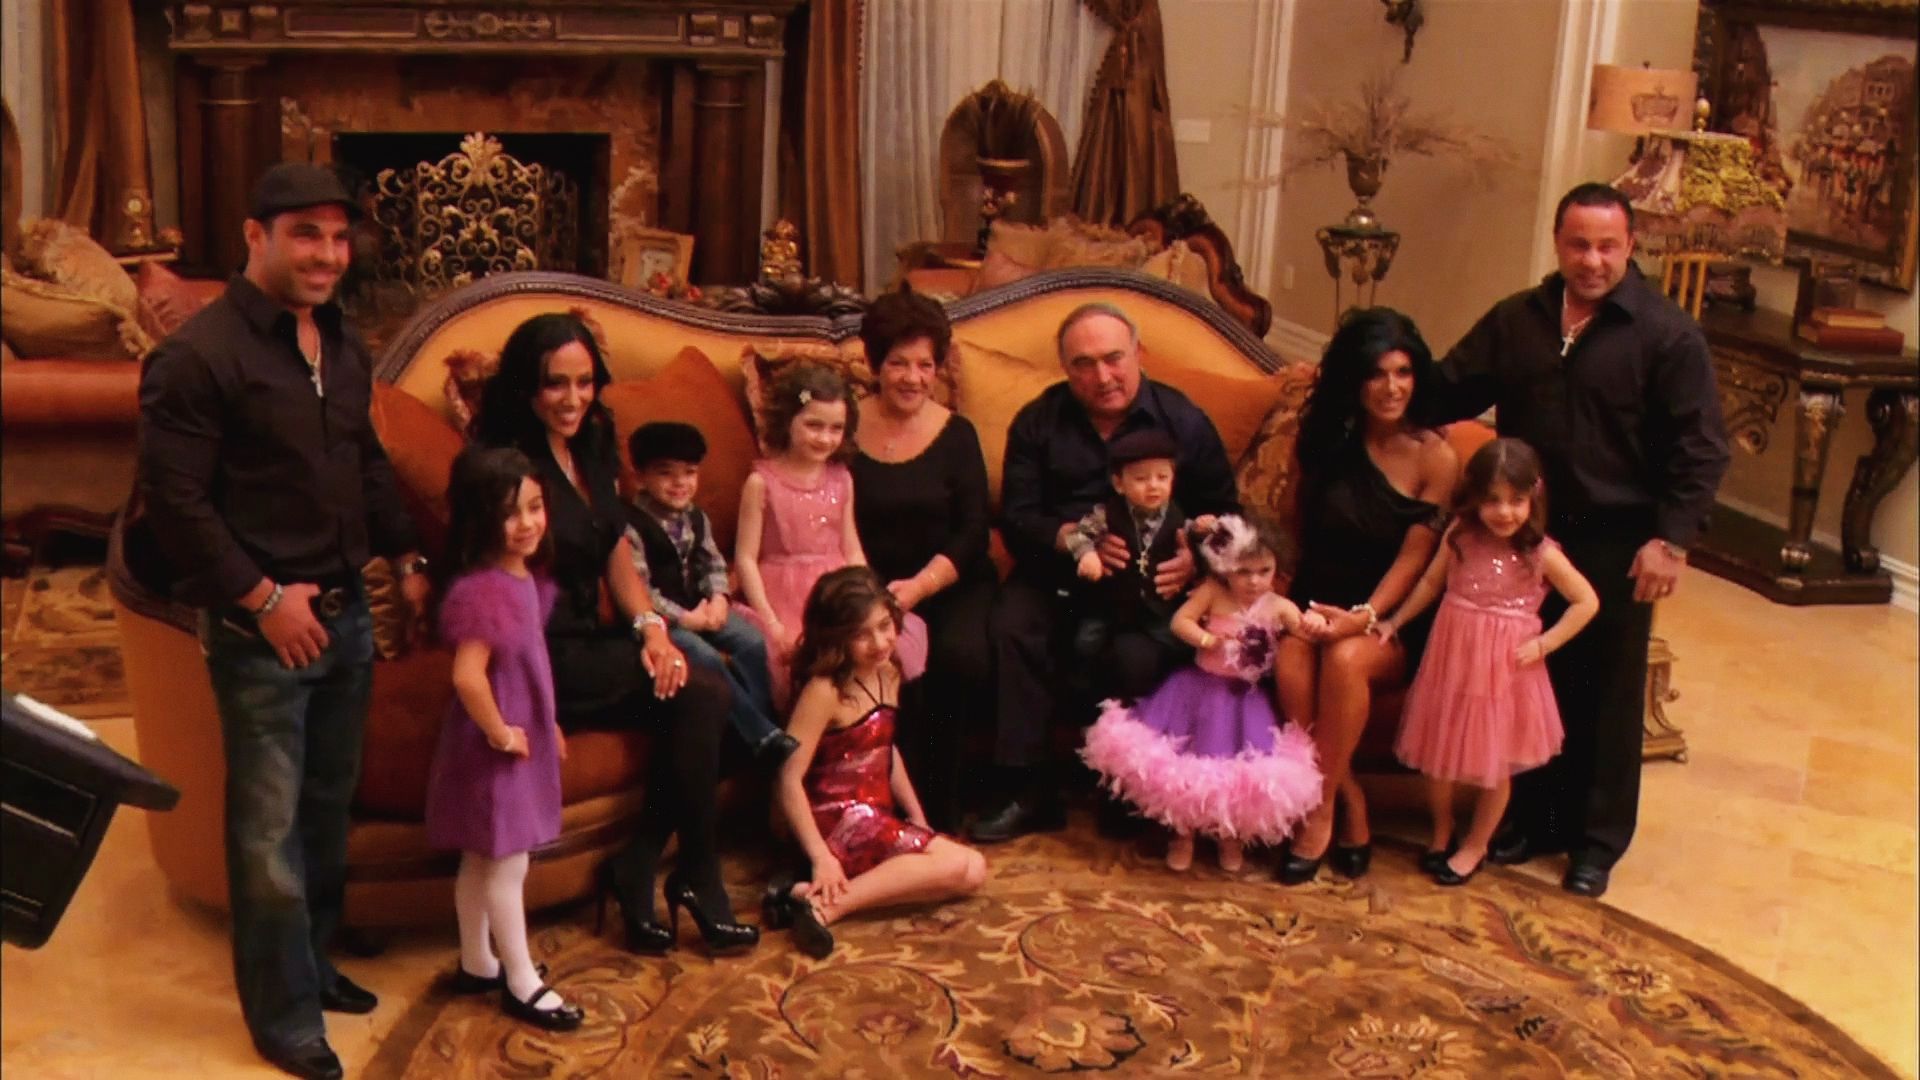 RHONJ The Real Housewives of New Jersey S3E19 saison 3 épisode 19 Portrait of an Italian Family